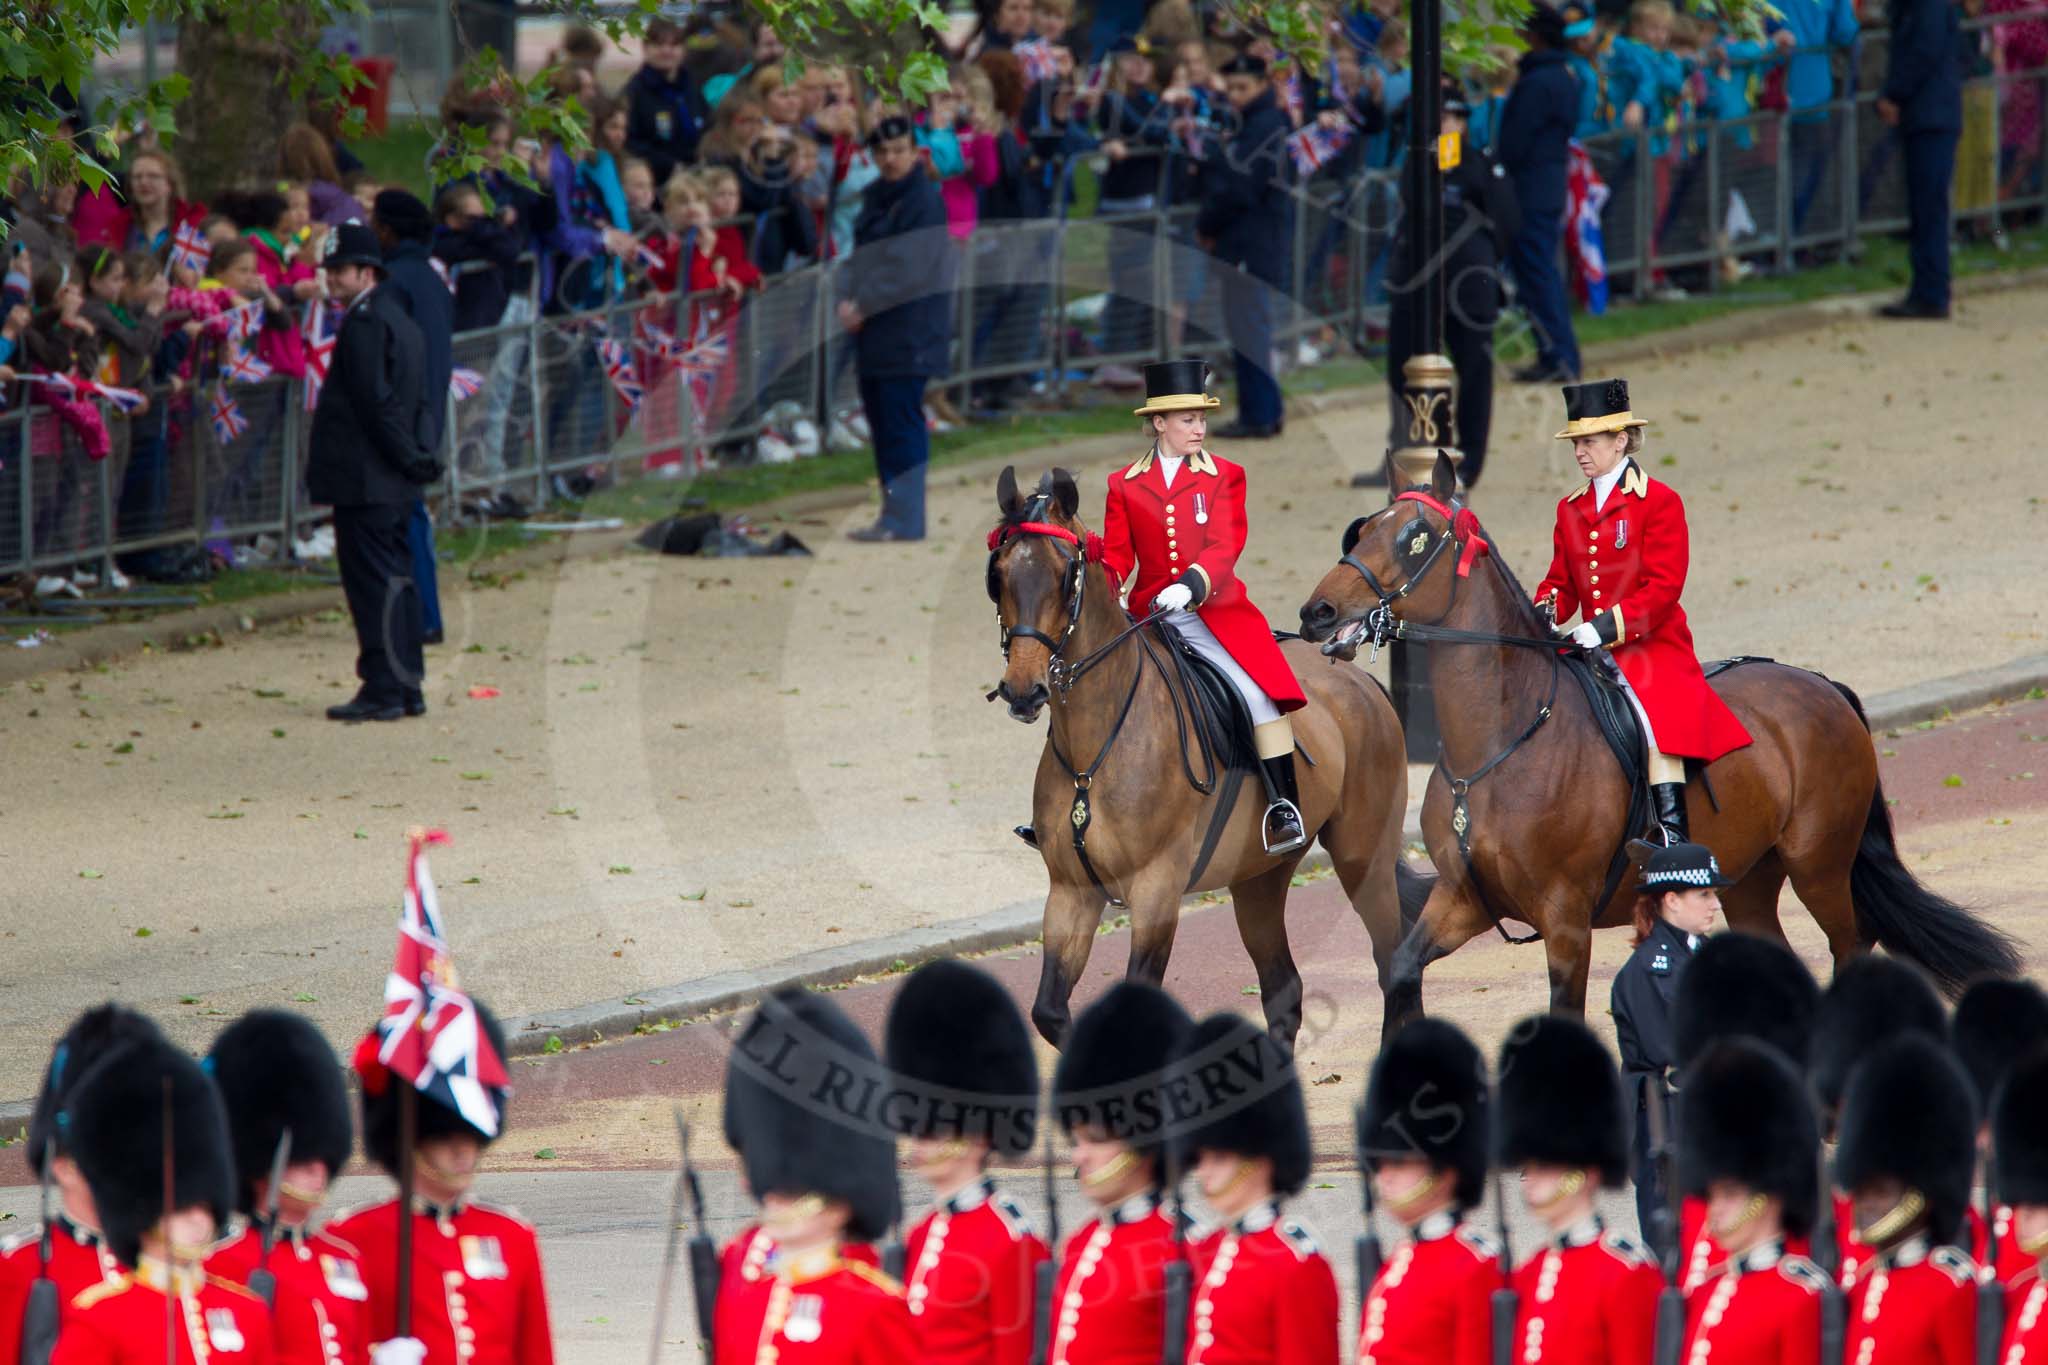 The Colonel's Review 2012: The arrival of the first members of the Royal family. leading the way two Liveried Grooms from the Royal Mews..
Horse Guards Parade, Westminster,
London SW1,

United Kingdom,
on 09 June 2012 at 10:48, image #118